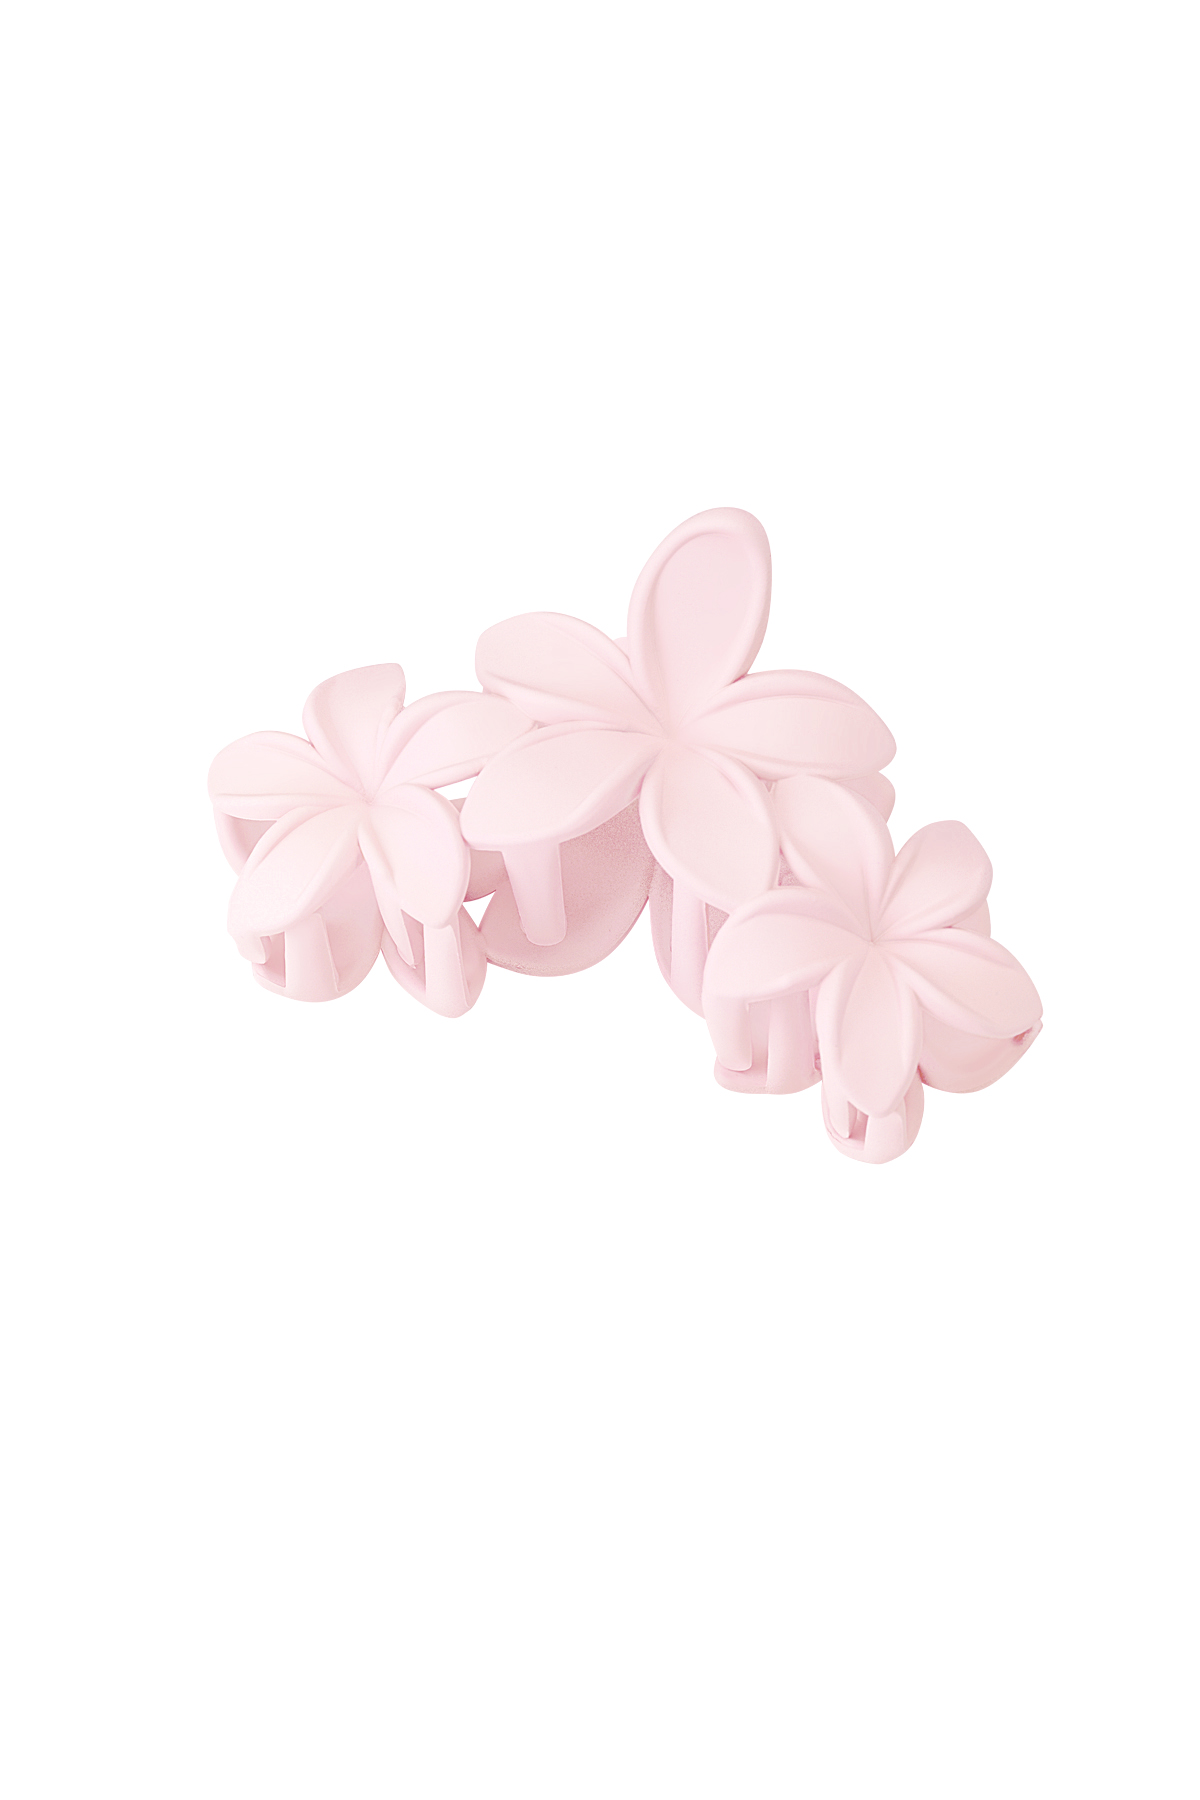 hair clip with large flowers - cotton candy pink h5 